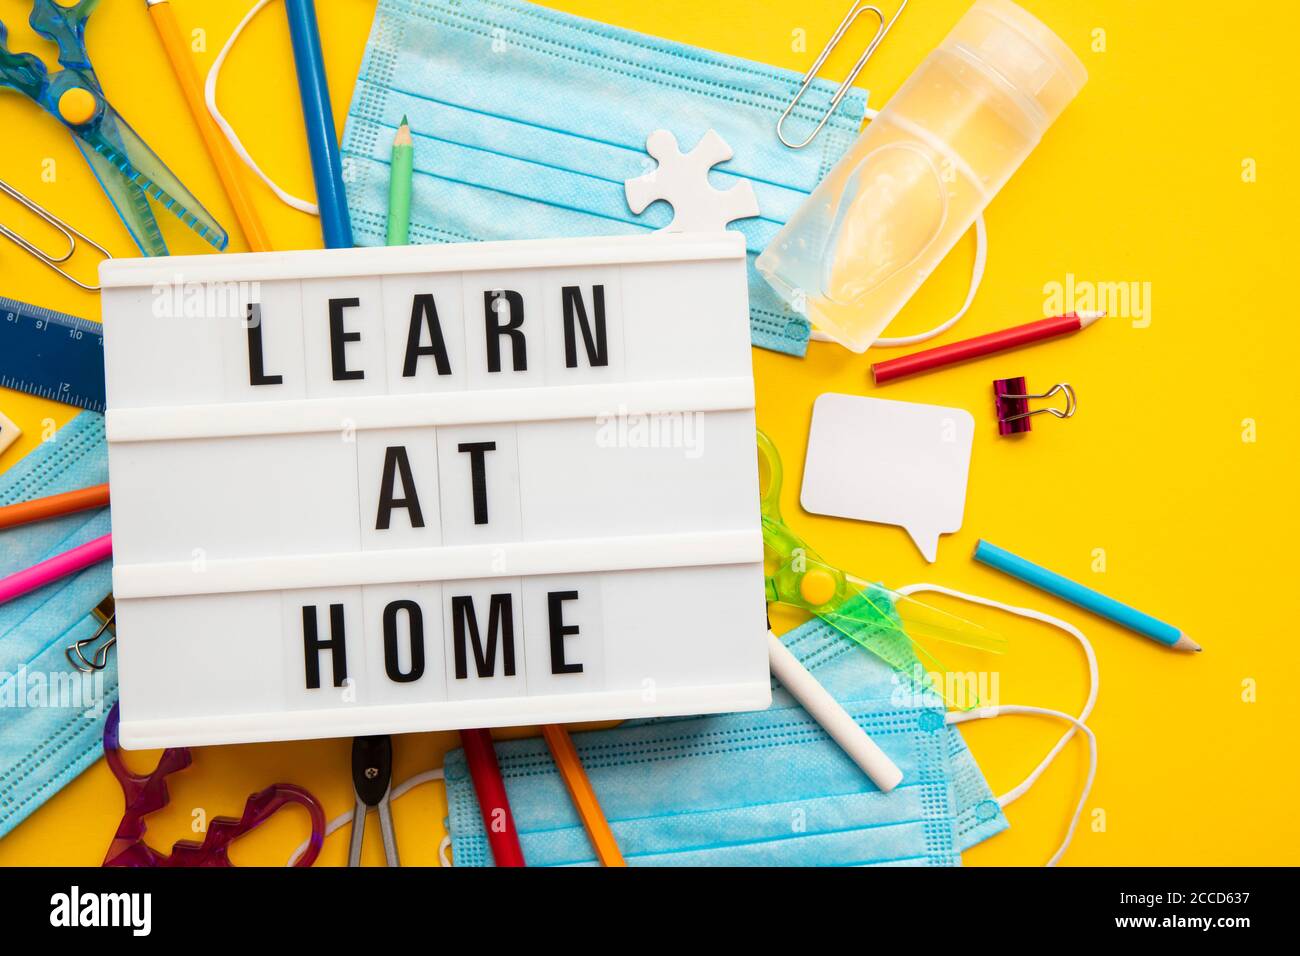 Learn at home lightbox message with school equipment and covid masks Stock Photo